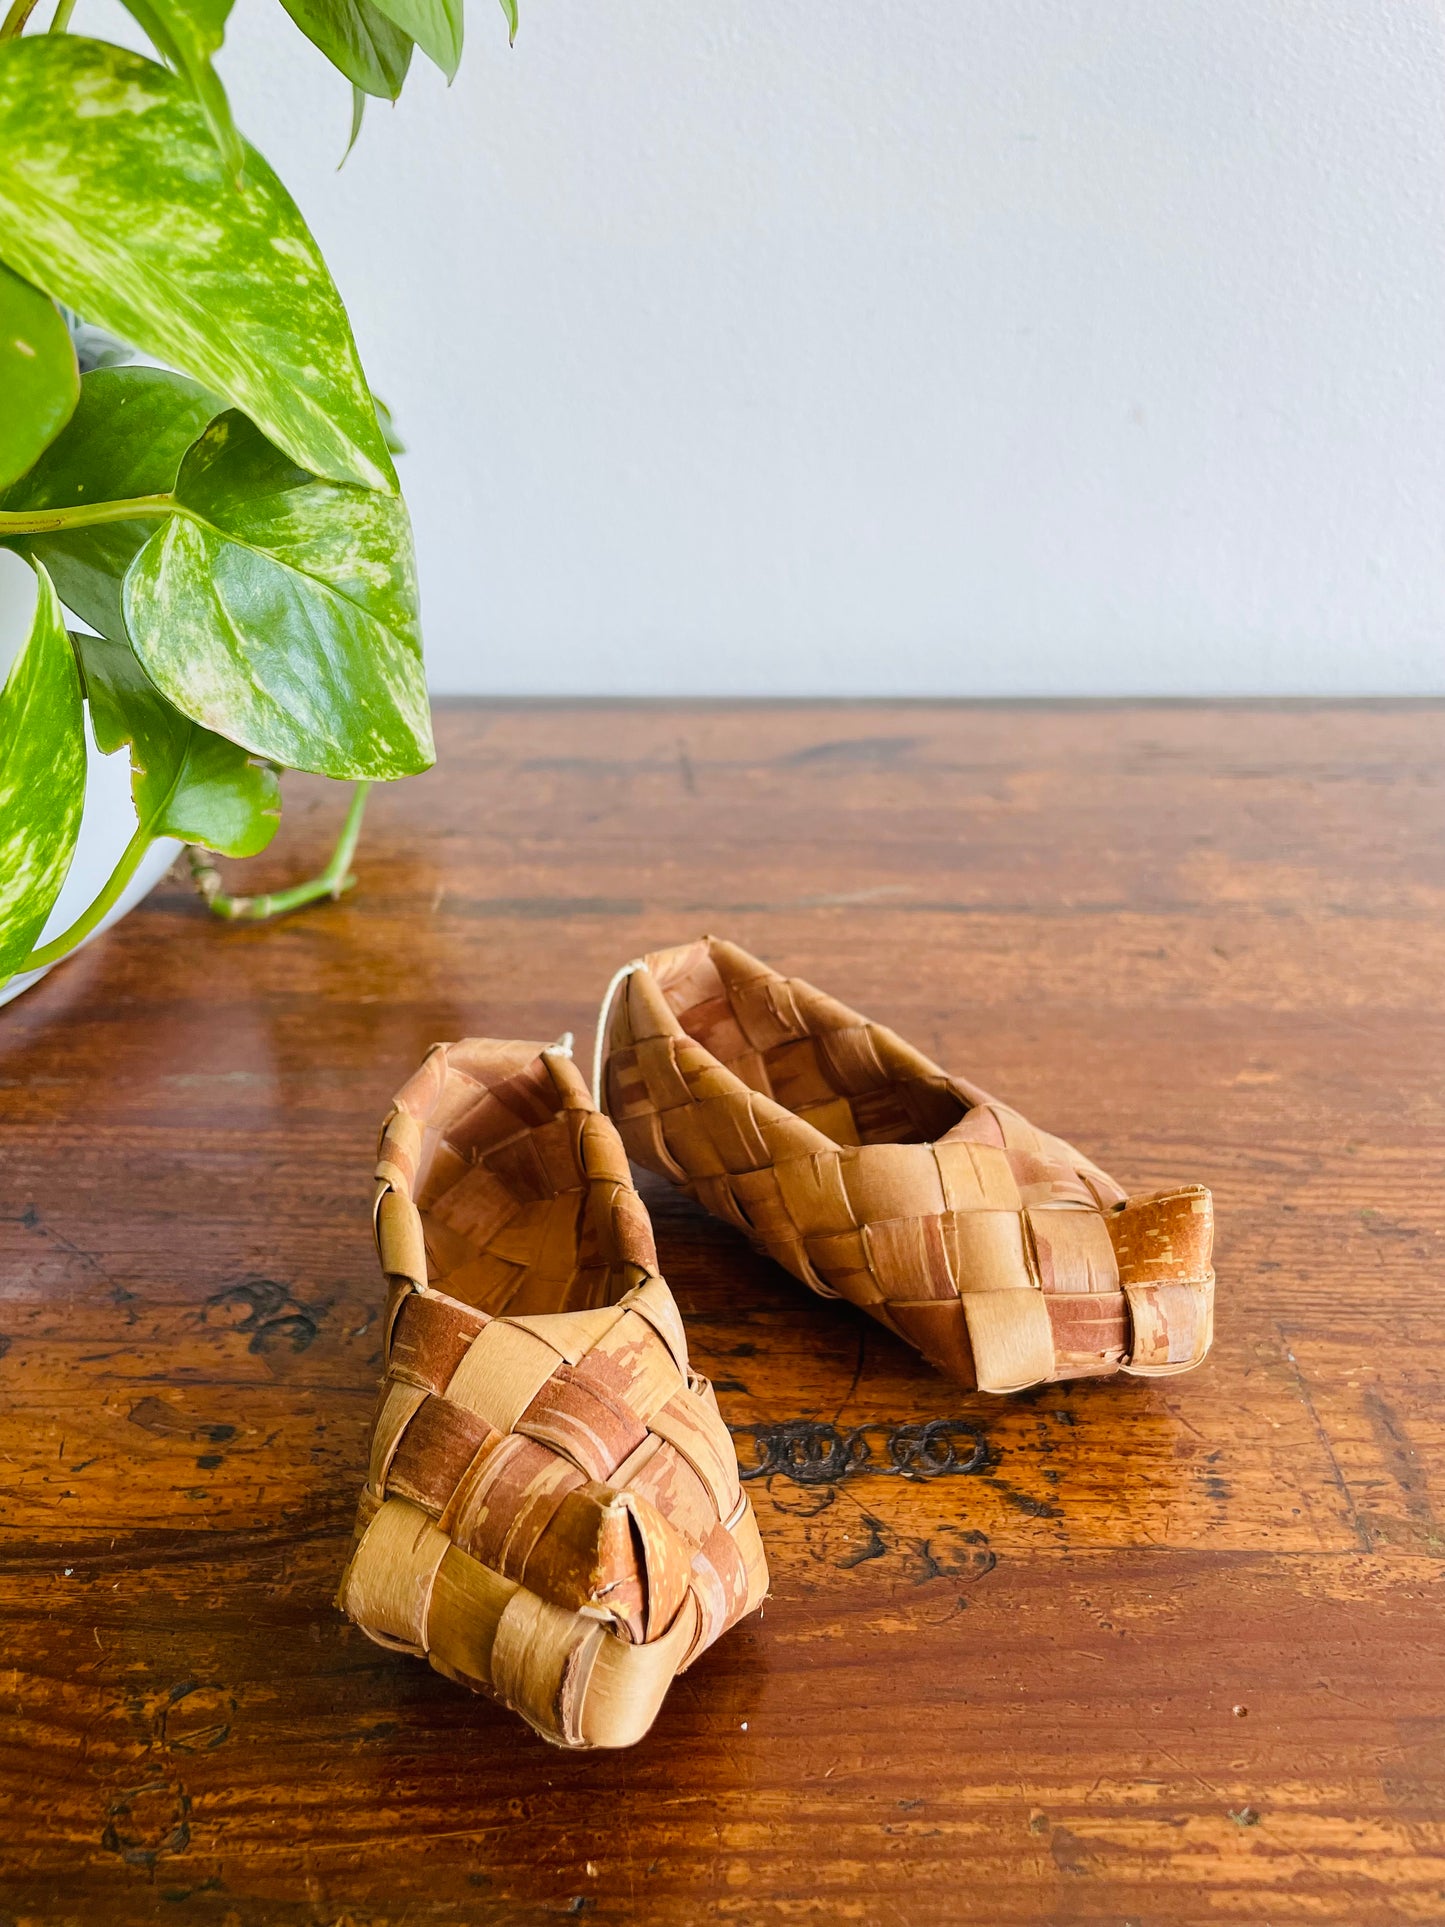 Finnish Birch Bark Woven Wood Shoes # 2 - Set of 2 Hanging on Rope